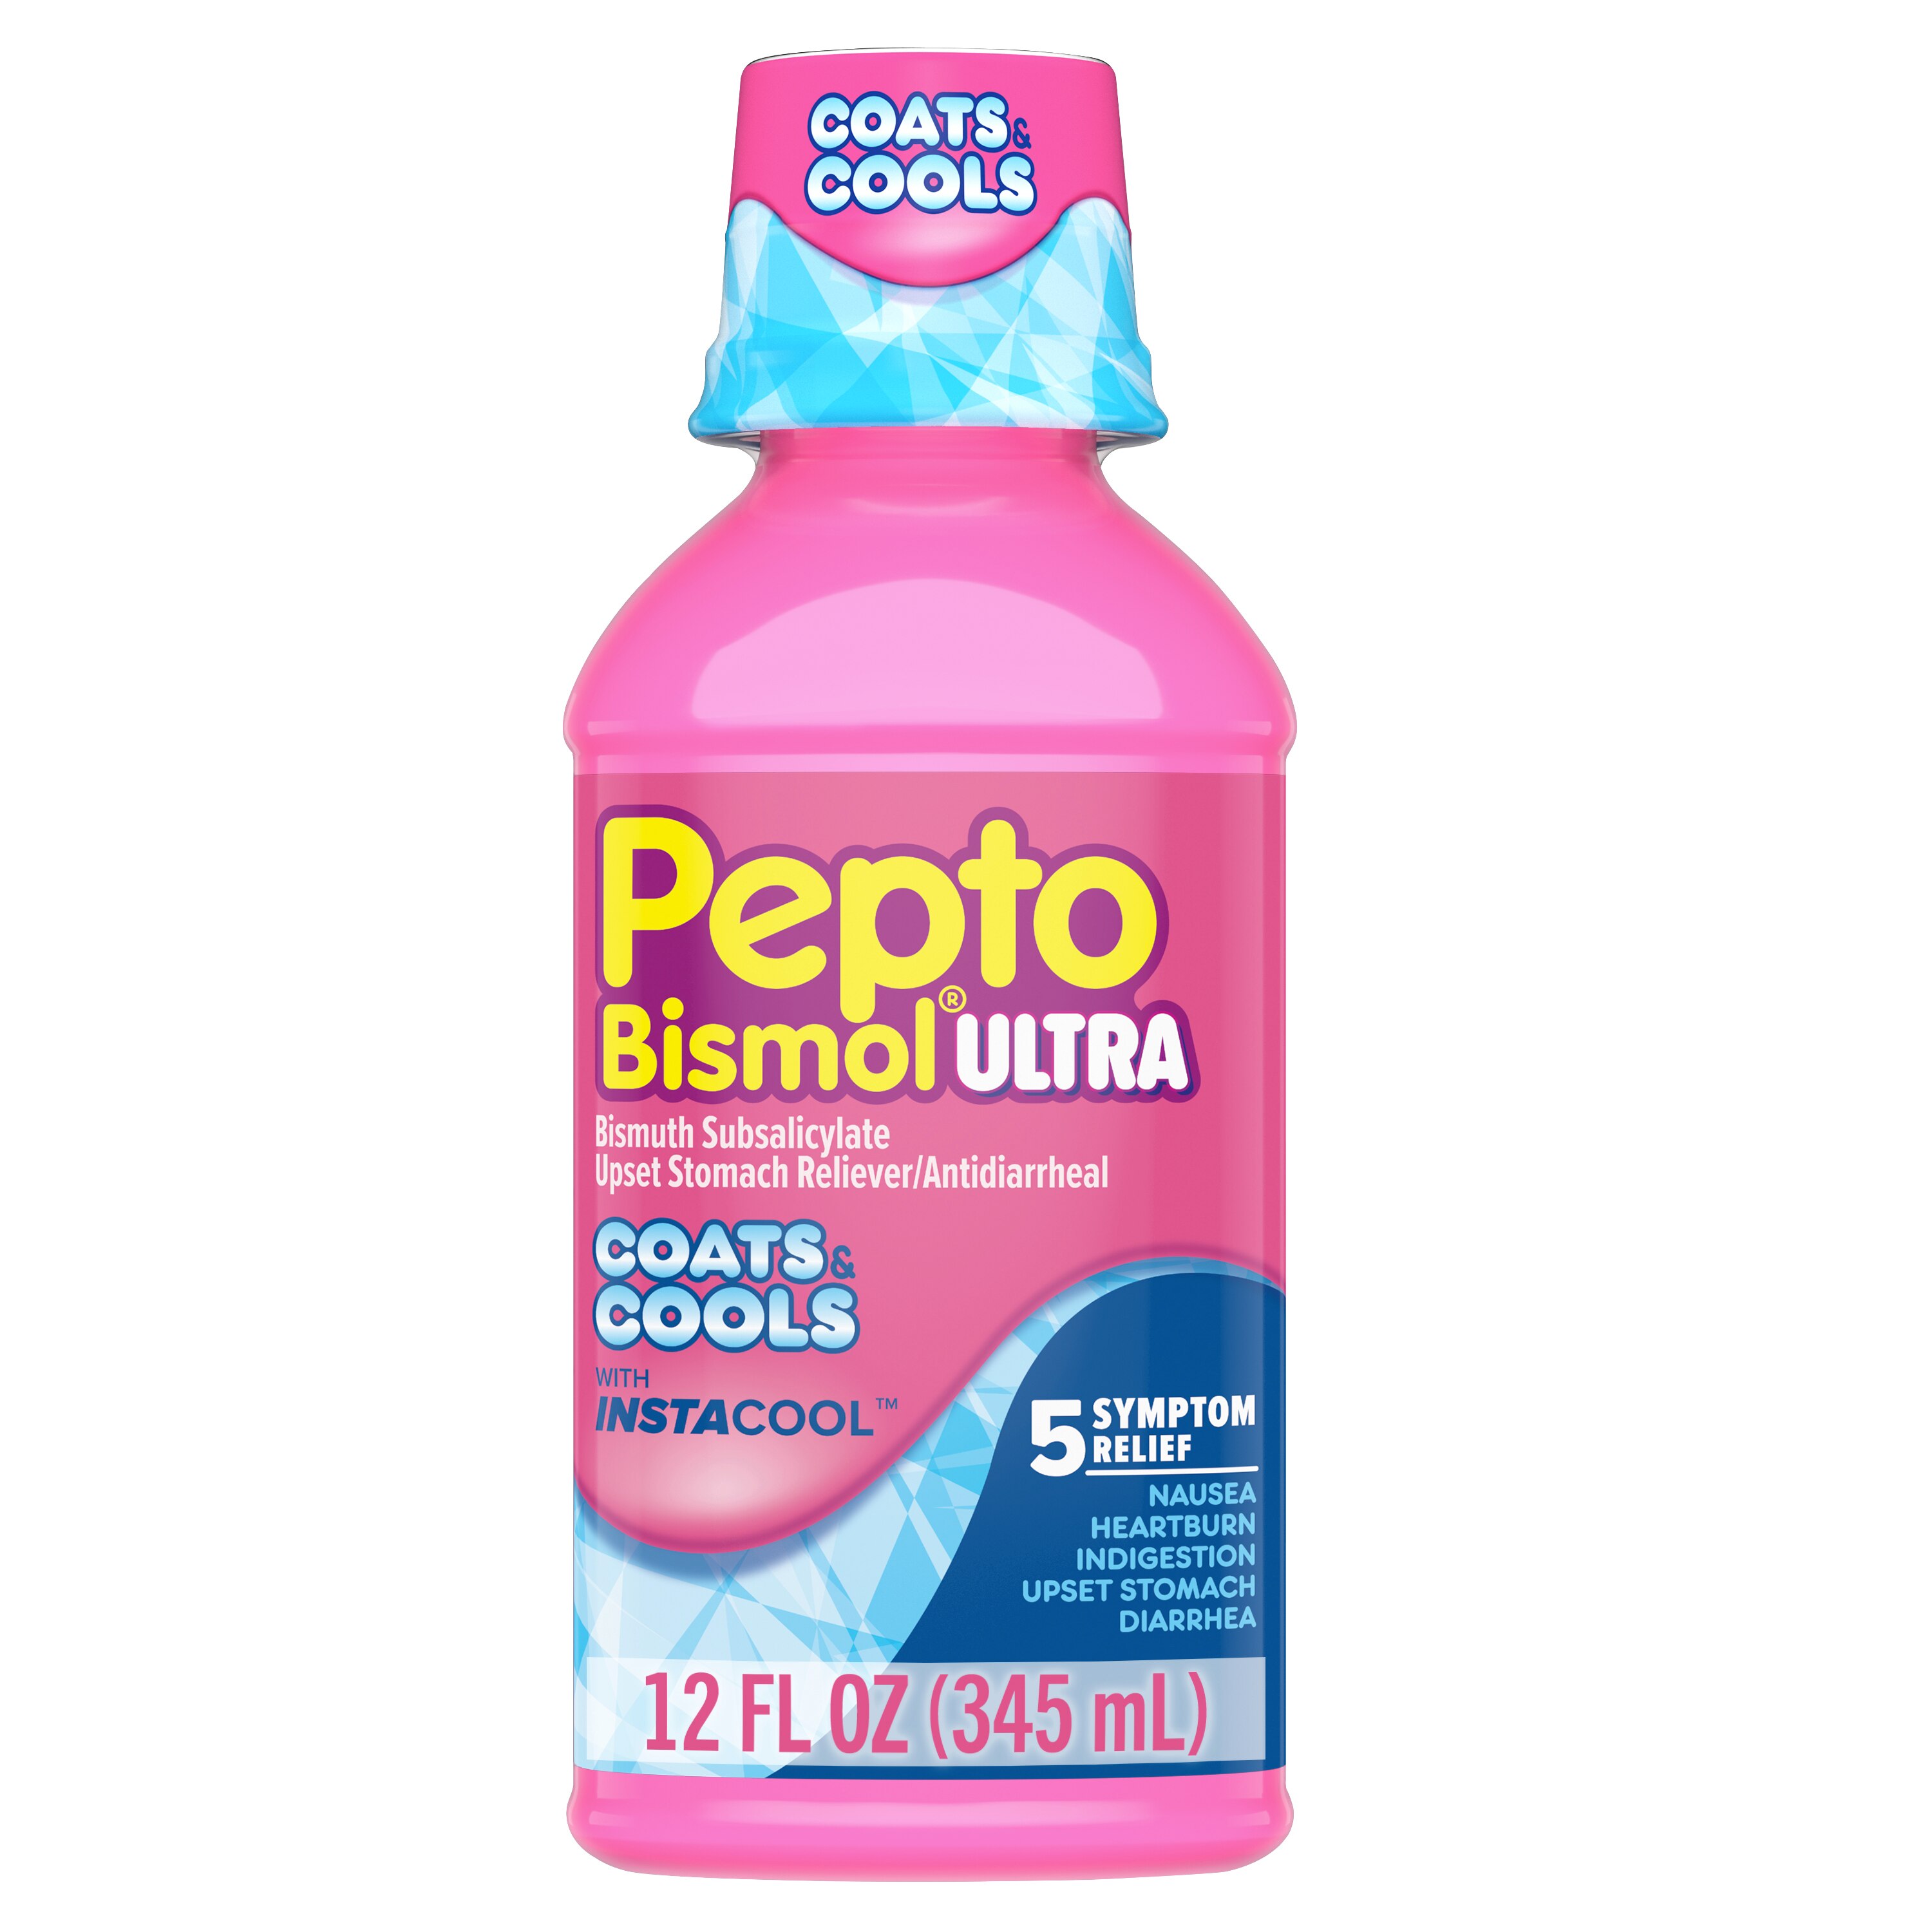 Pepto Bismol InstaCOOL Liquid, Coats and Cools Upset Stomach Relief, Bismuth Subsalicylate, Multi-Symptom Relief of Gas, Nausea, Heartburn, Indigestion, Upset Stomach, Diarrhea, 12 OZ